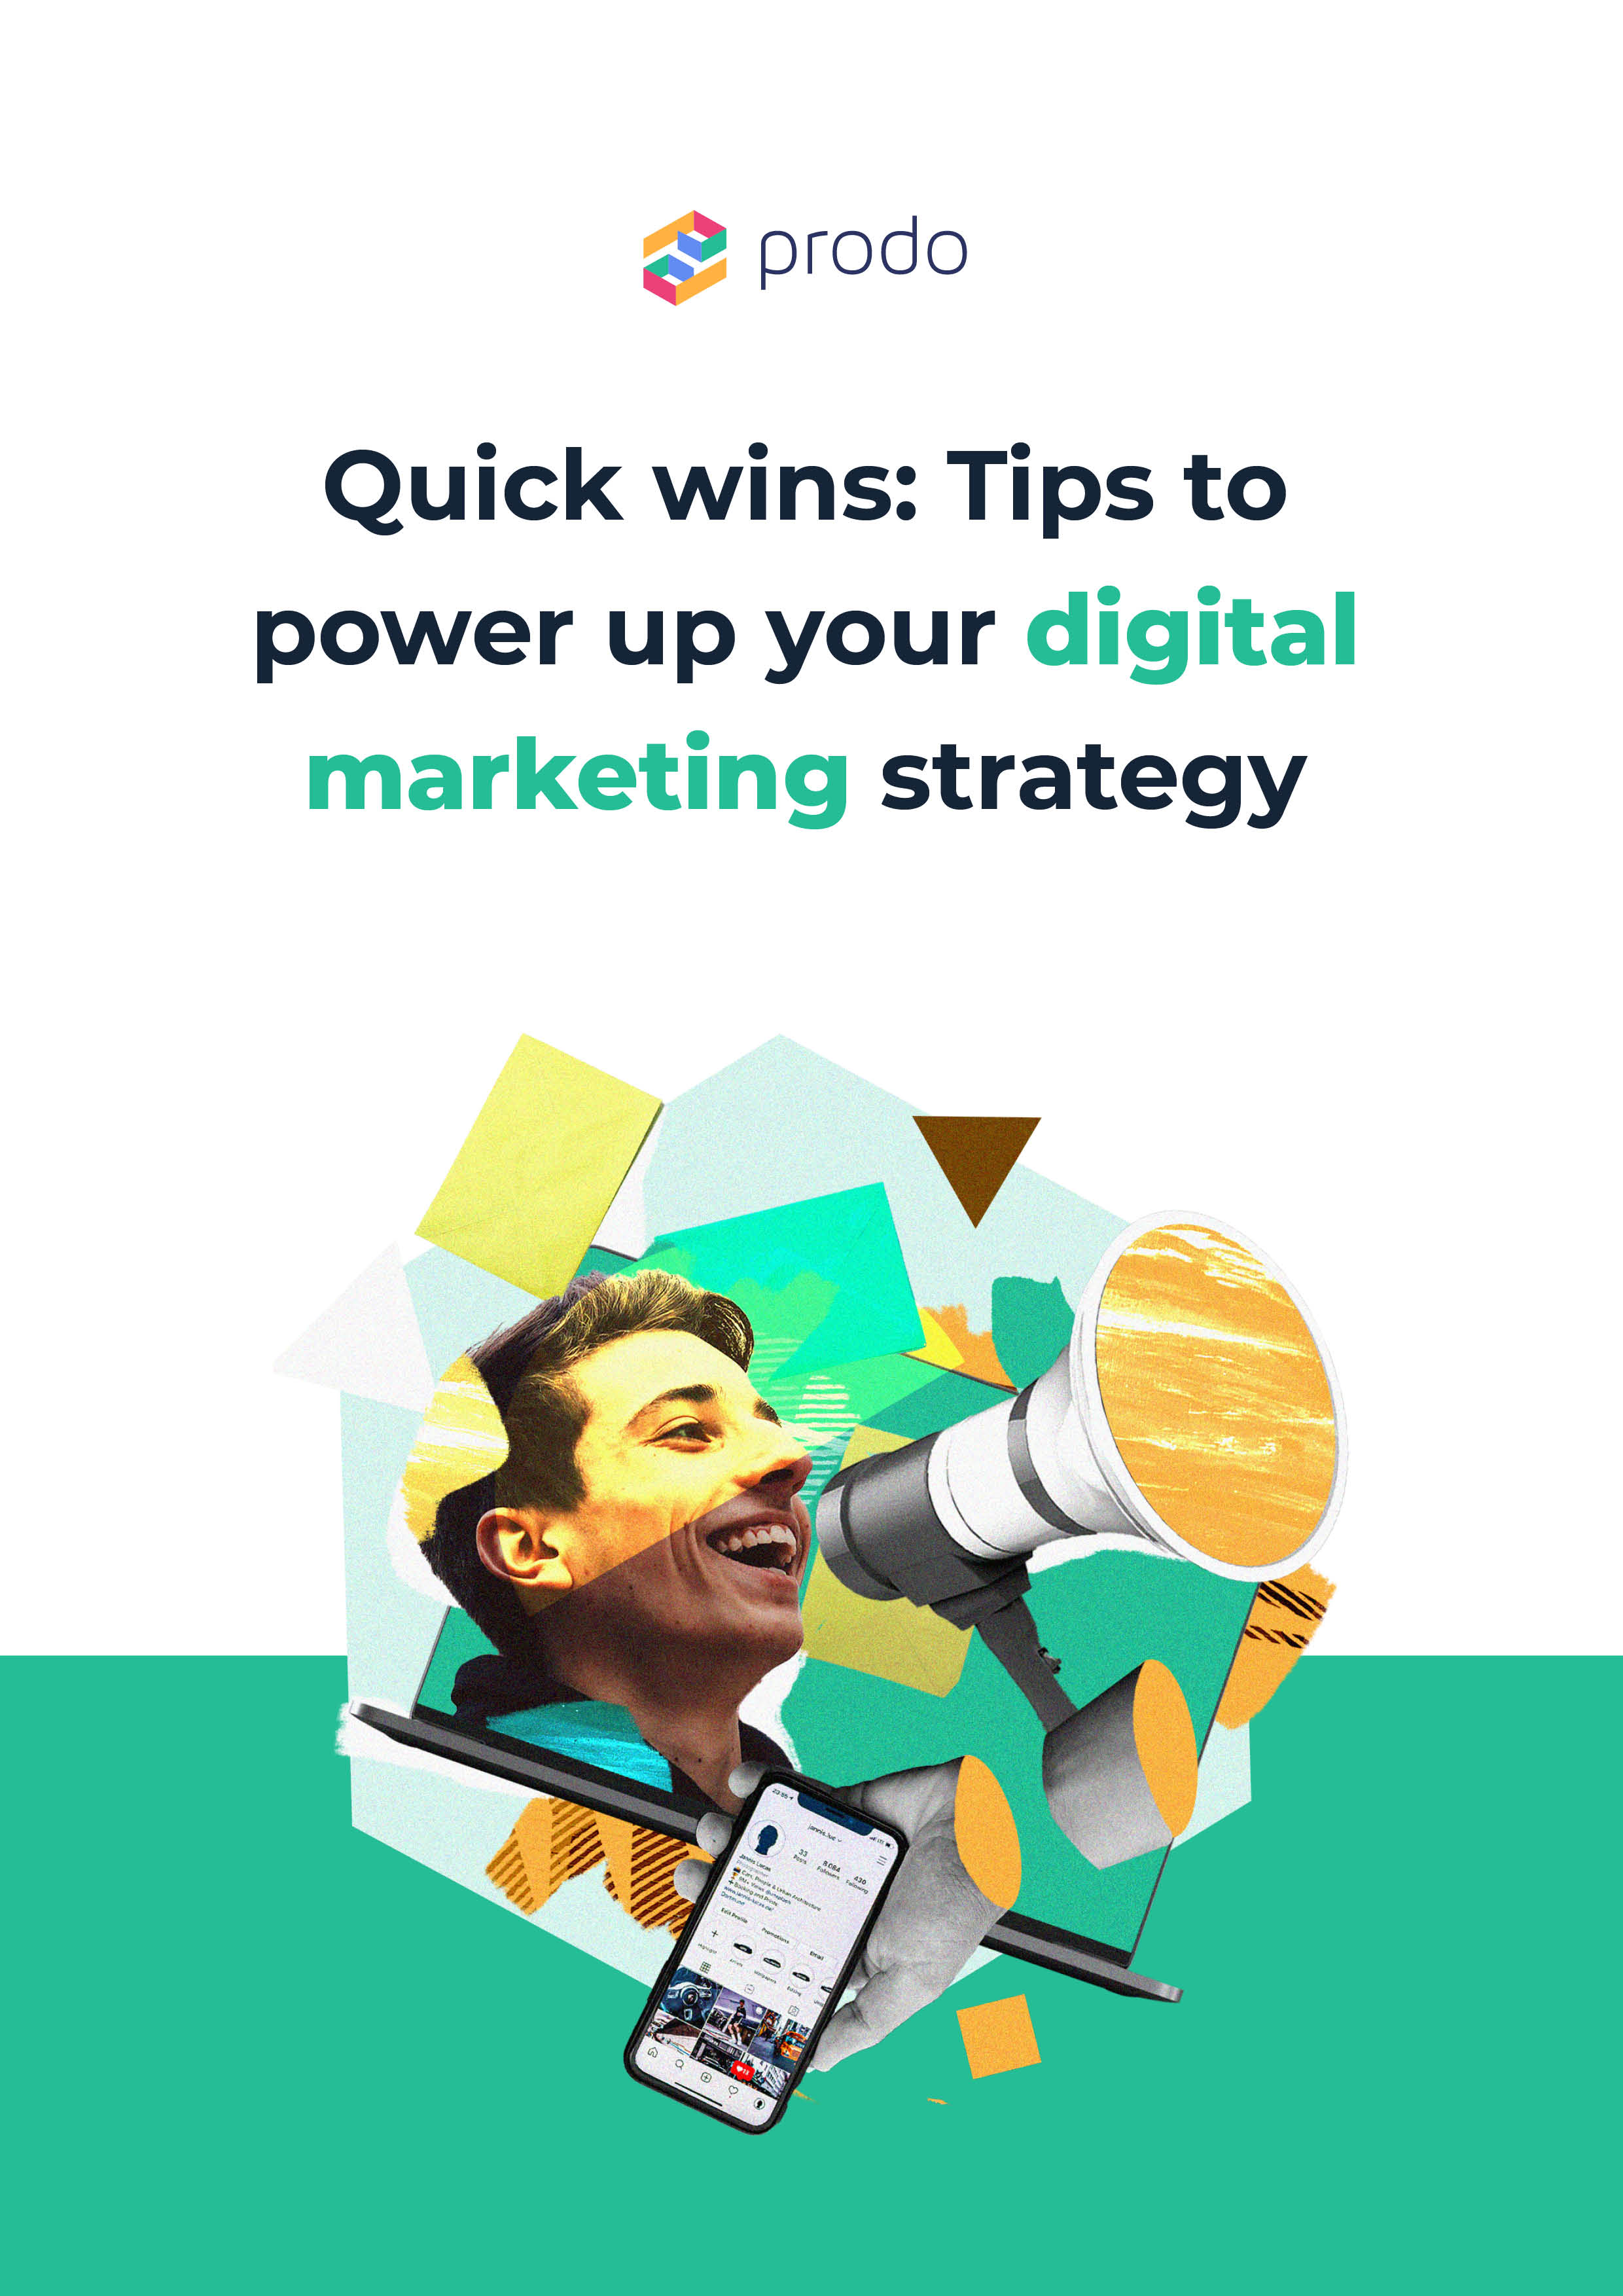 33 Quick wins to power up your marketing strategy